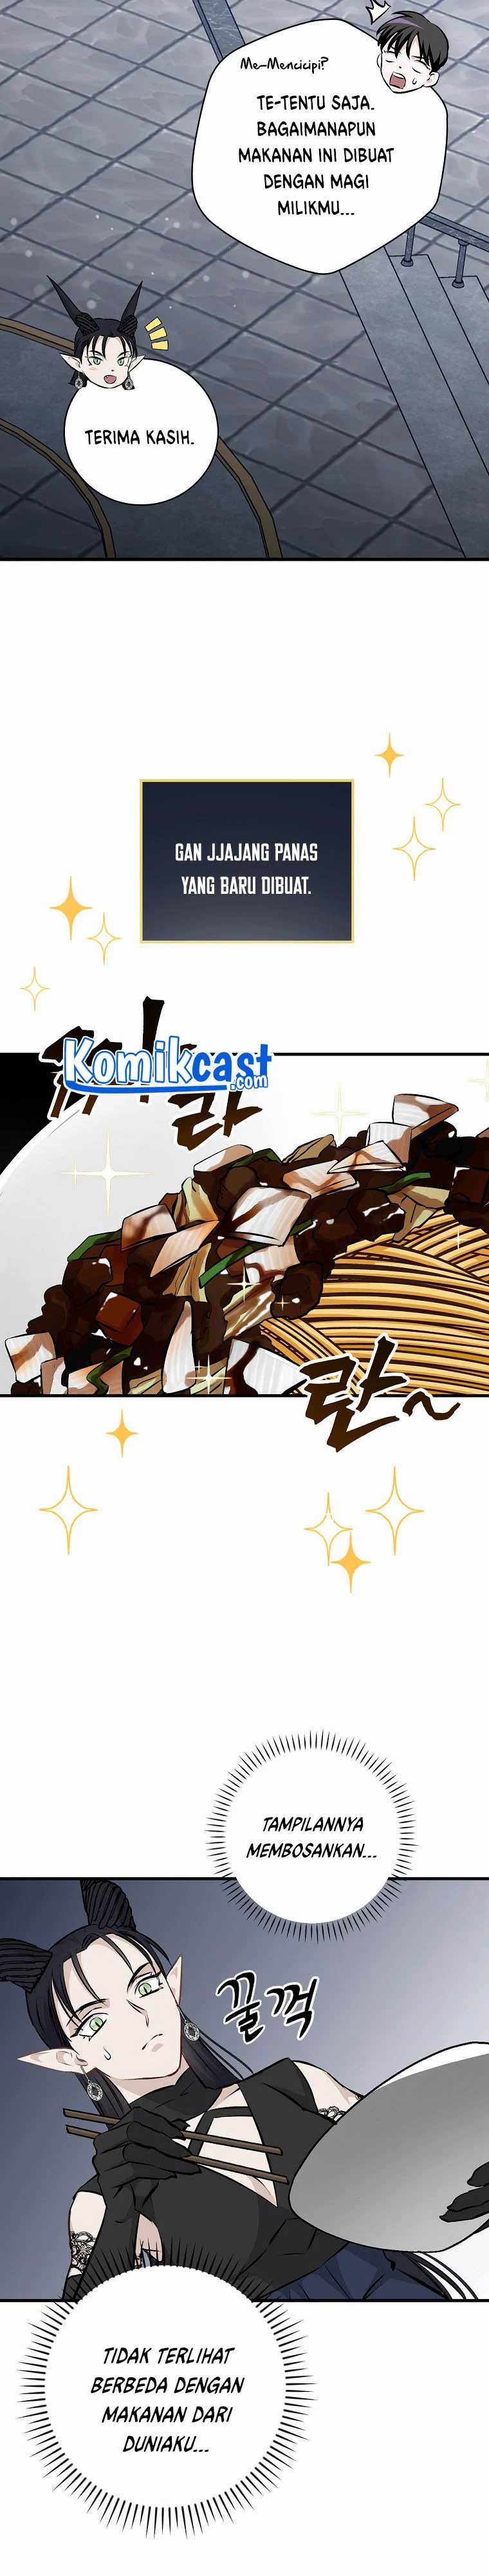 Leveling Up, By Only Eating! (Gourmet Gaming) Chapter 92 - 253